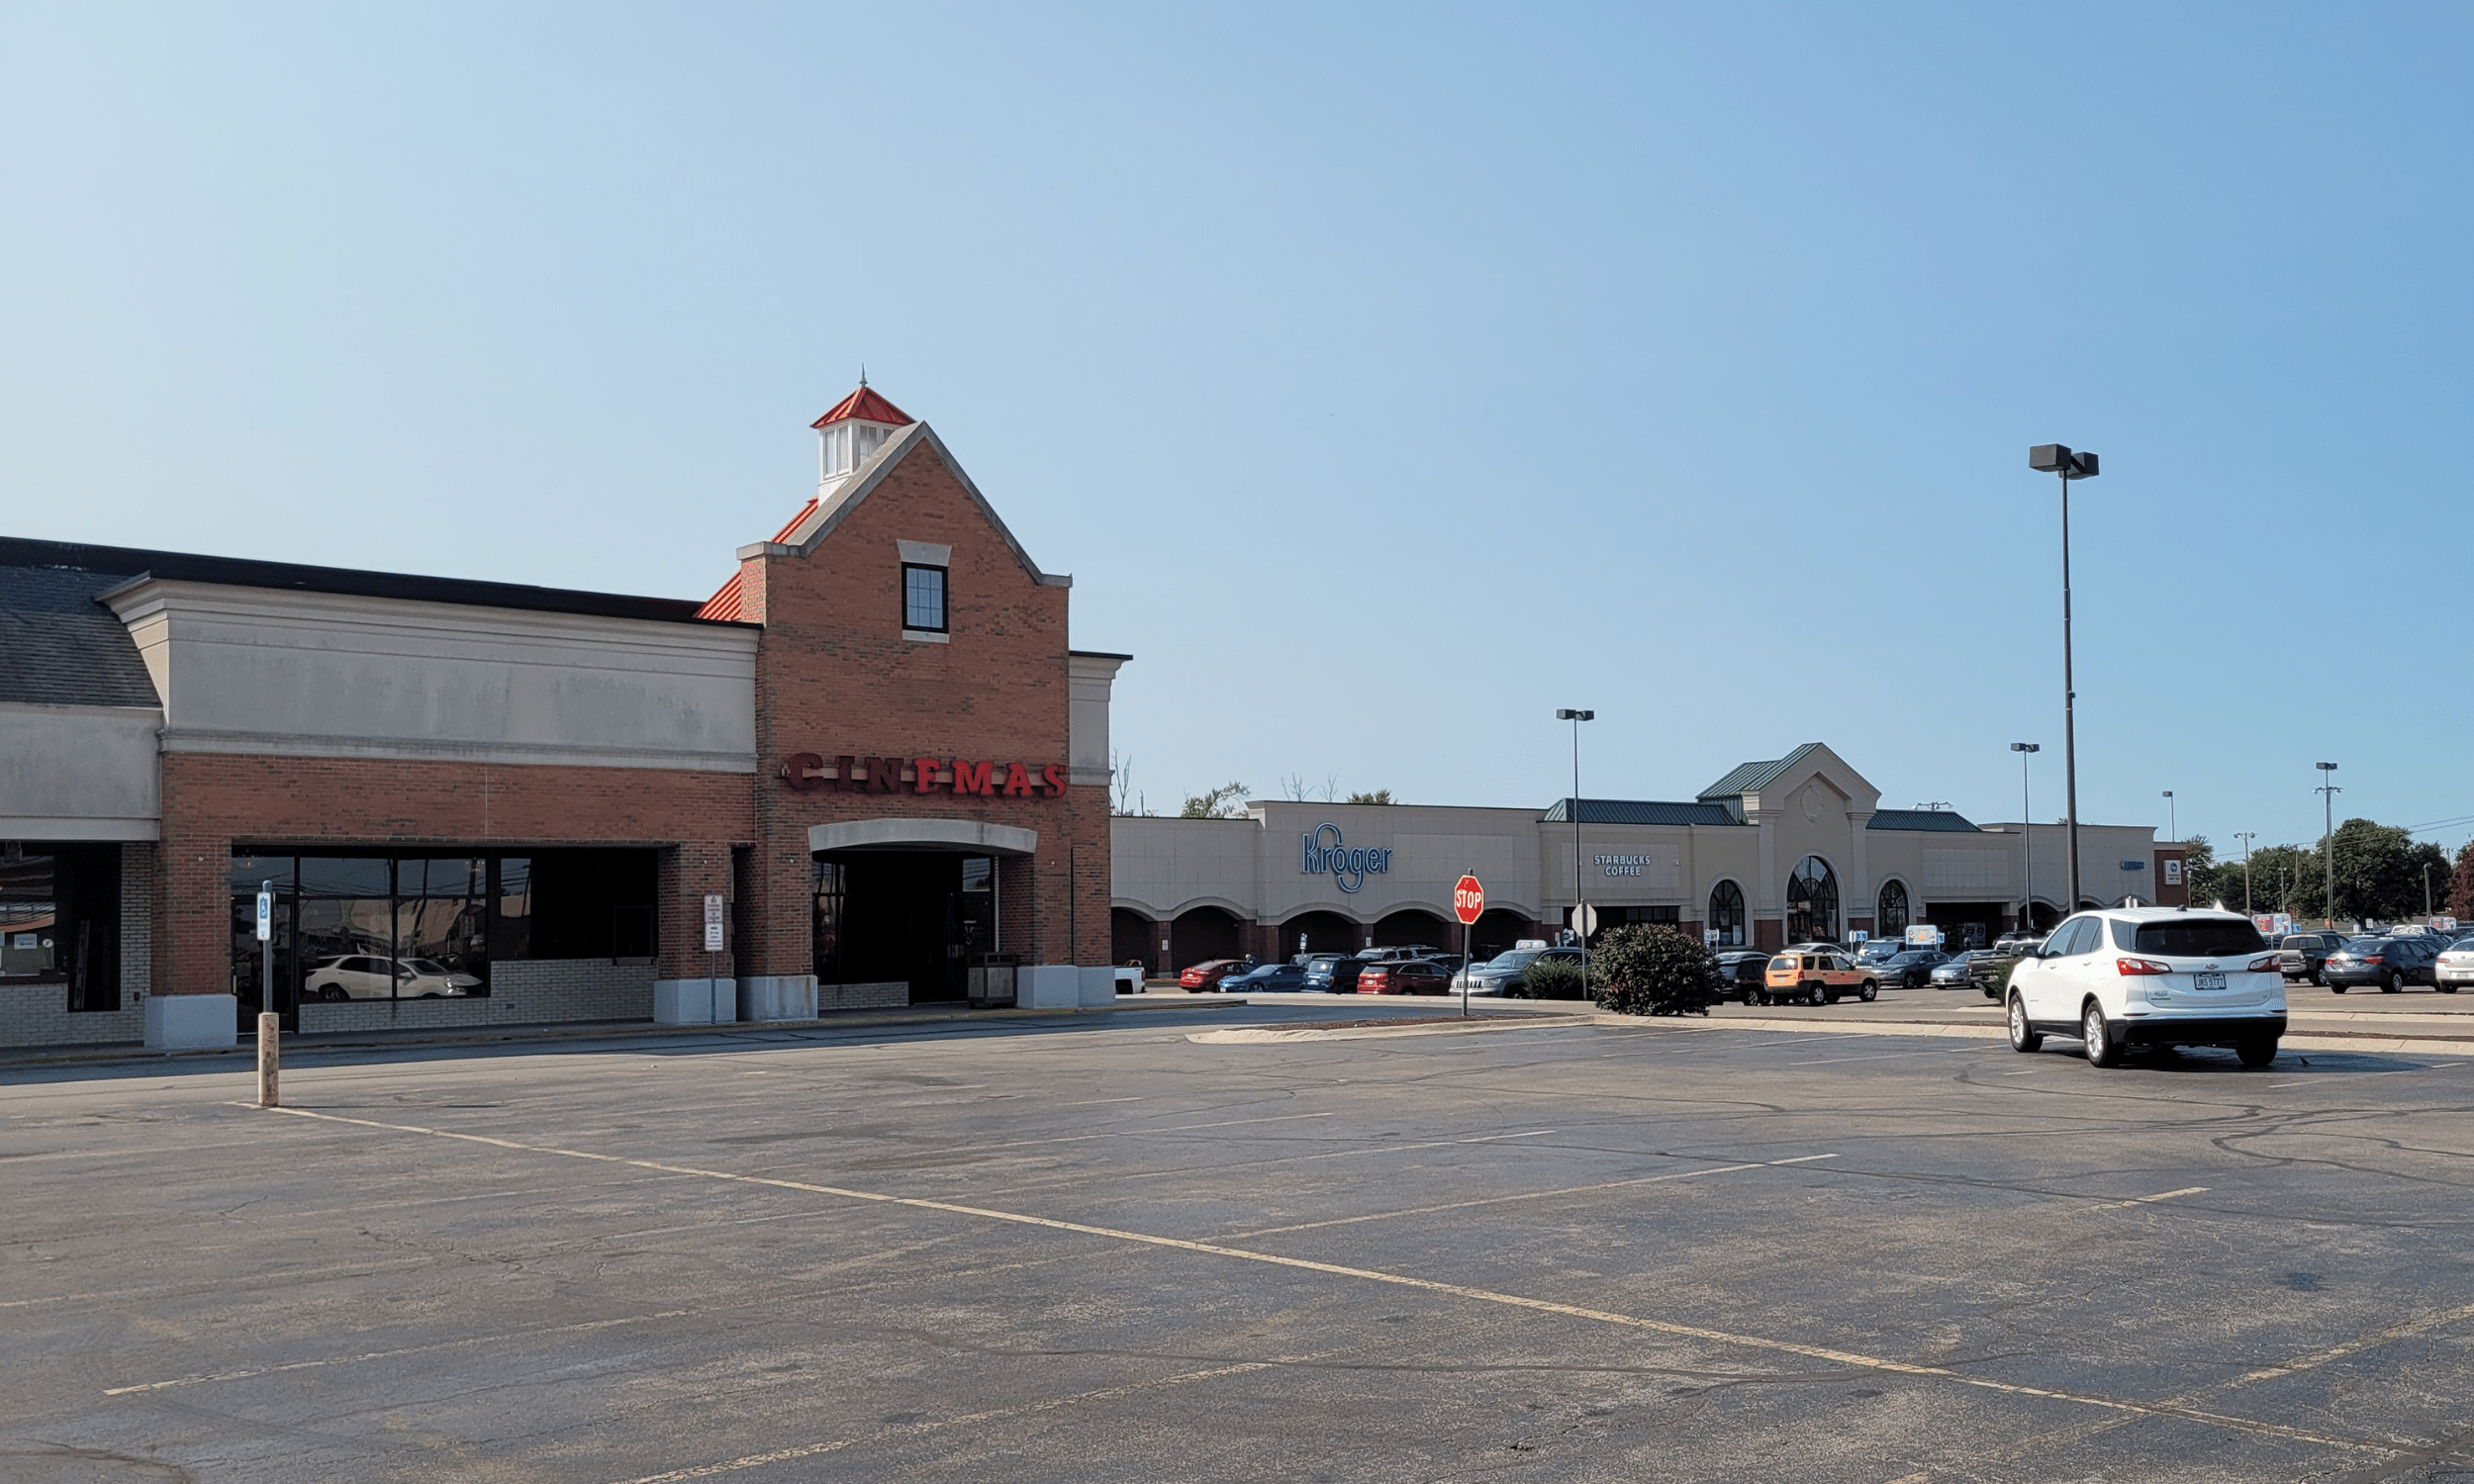 This grocery-anchored shopping center also includes a movie theater.